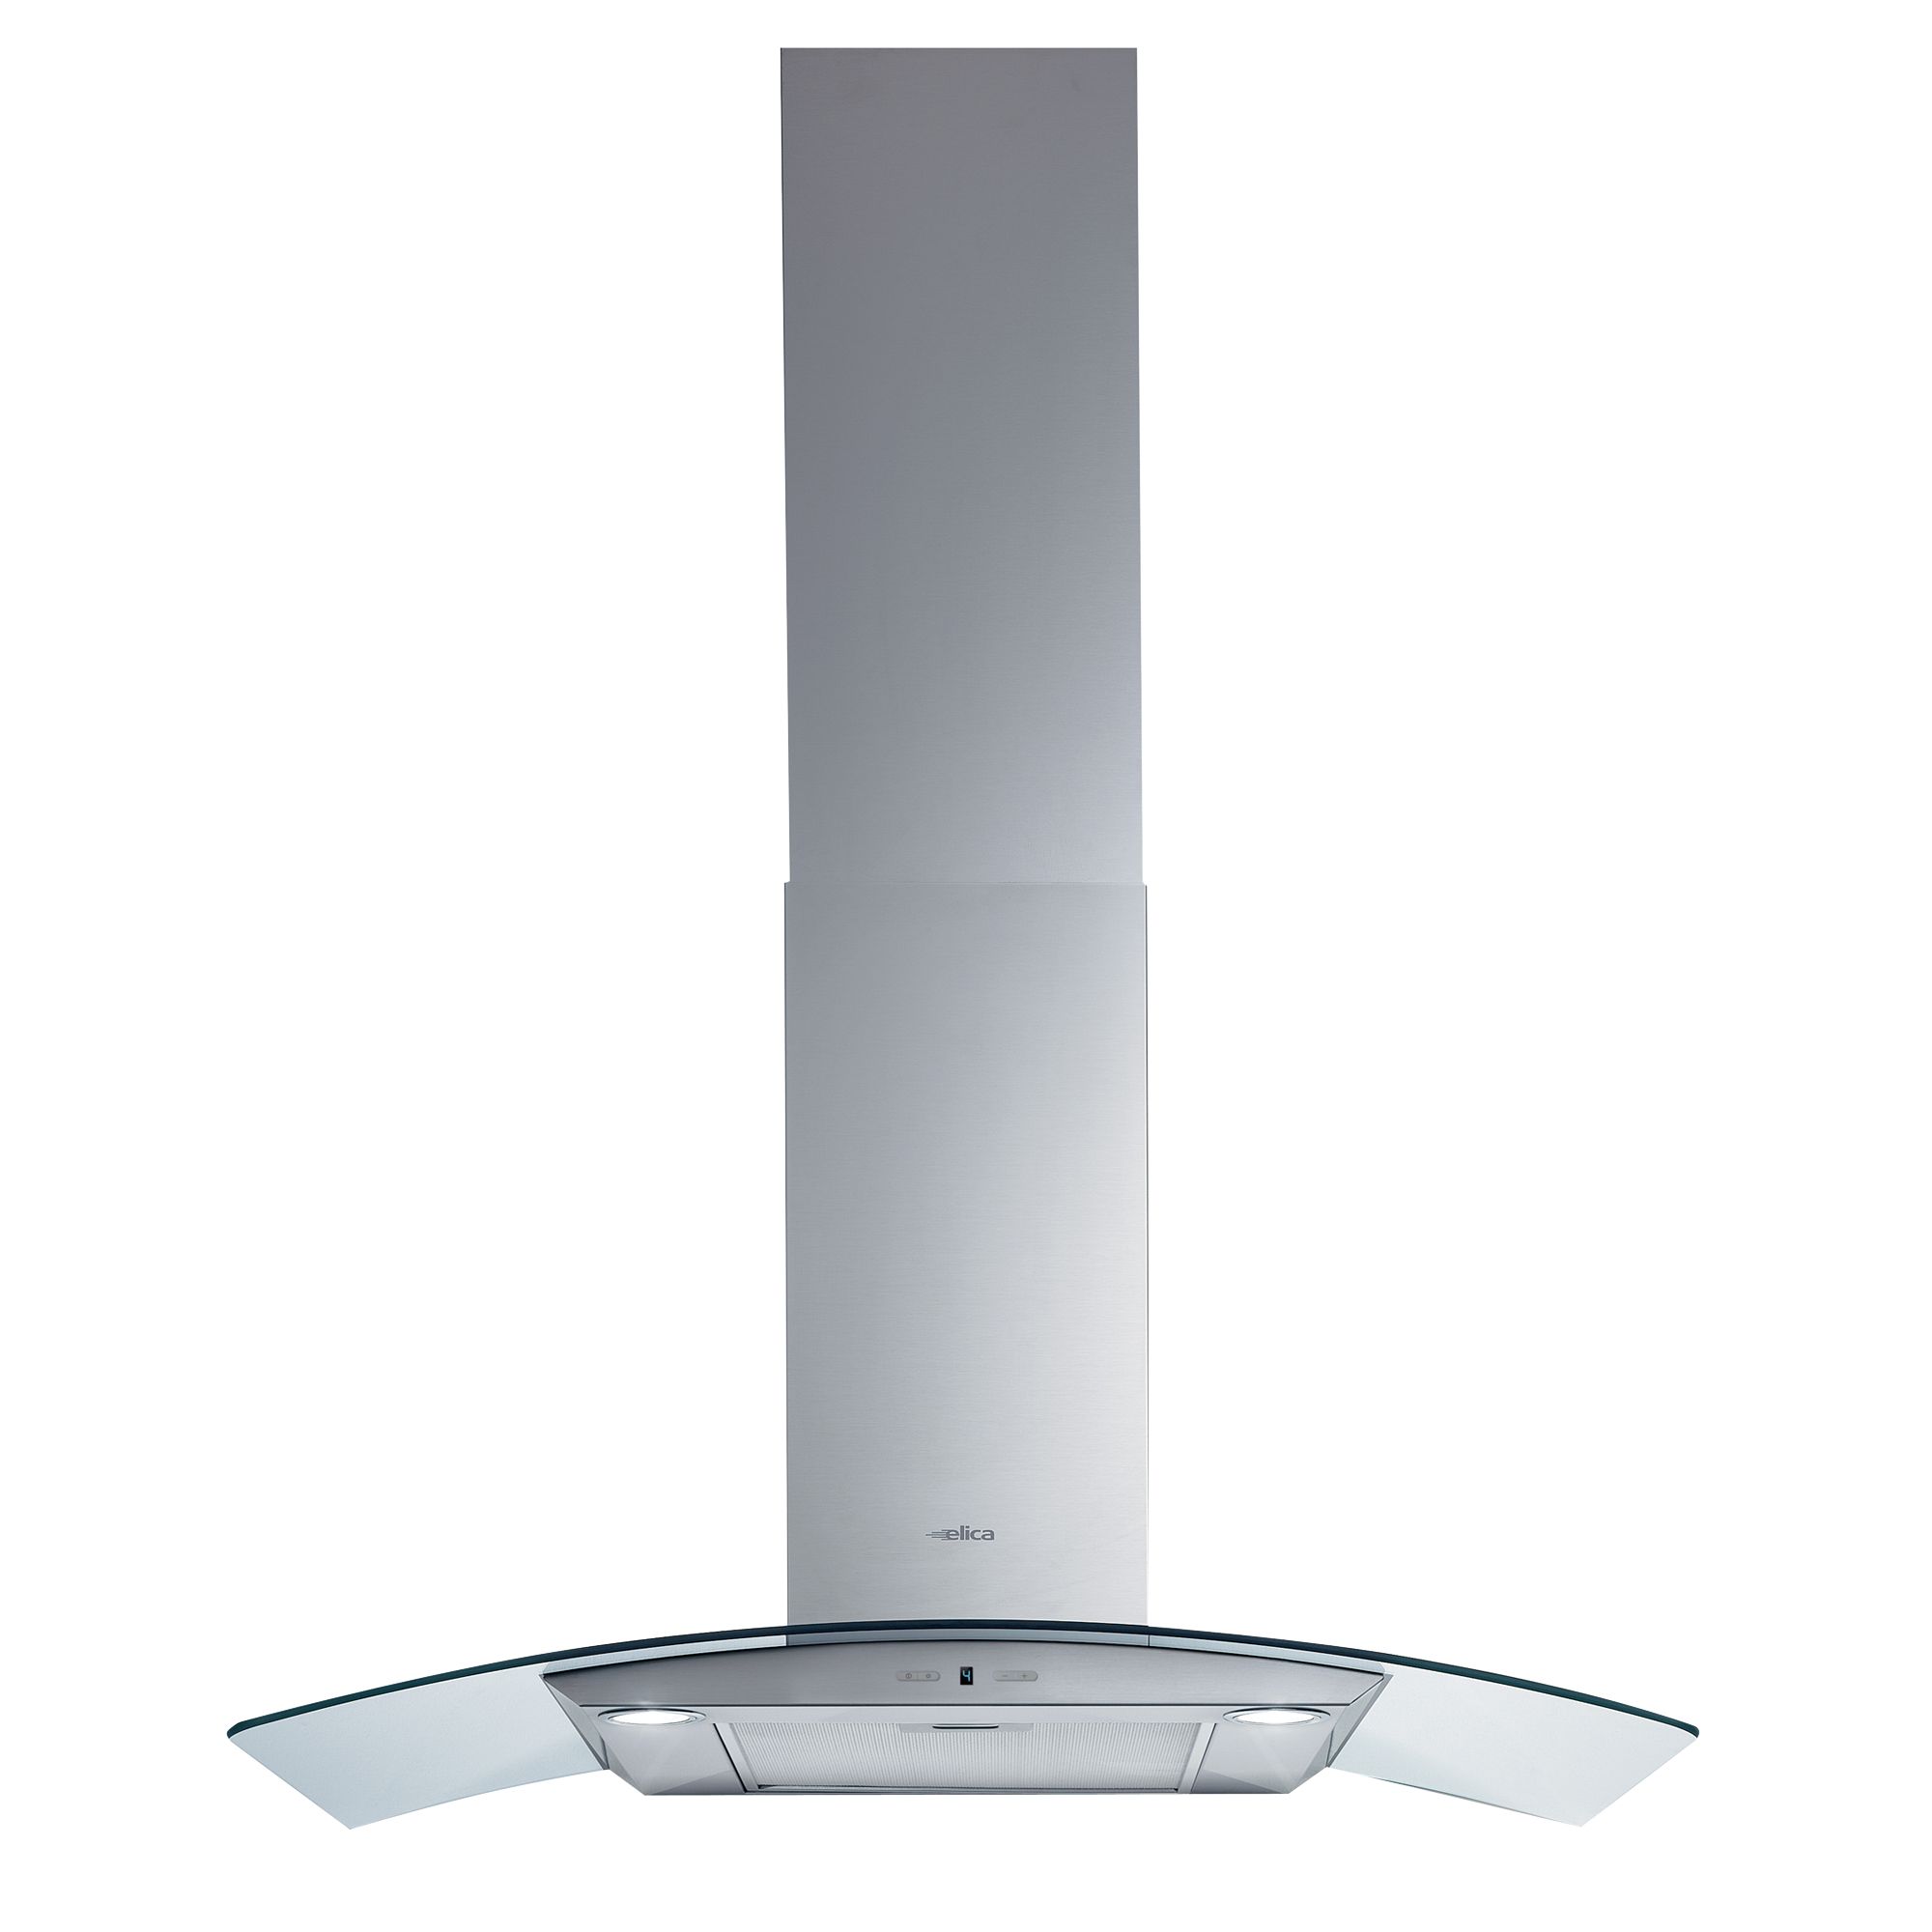 Elica Circus 90HP Chimney Cooker Hood, Stainless